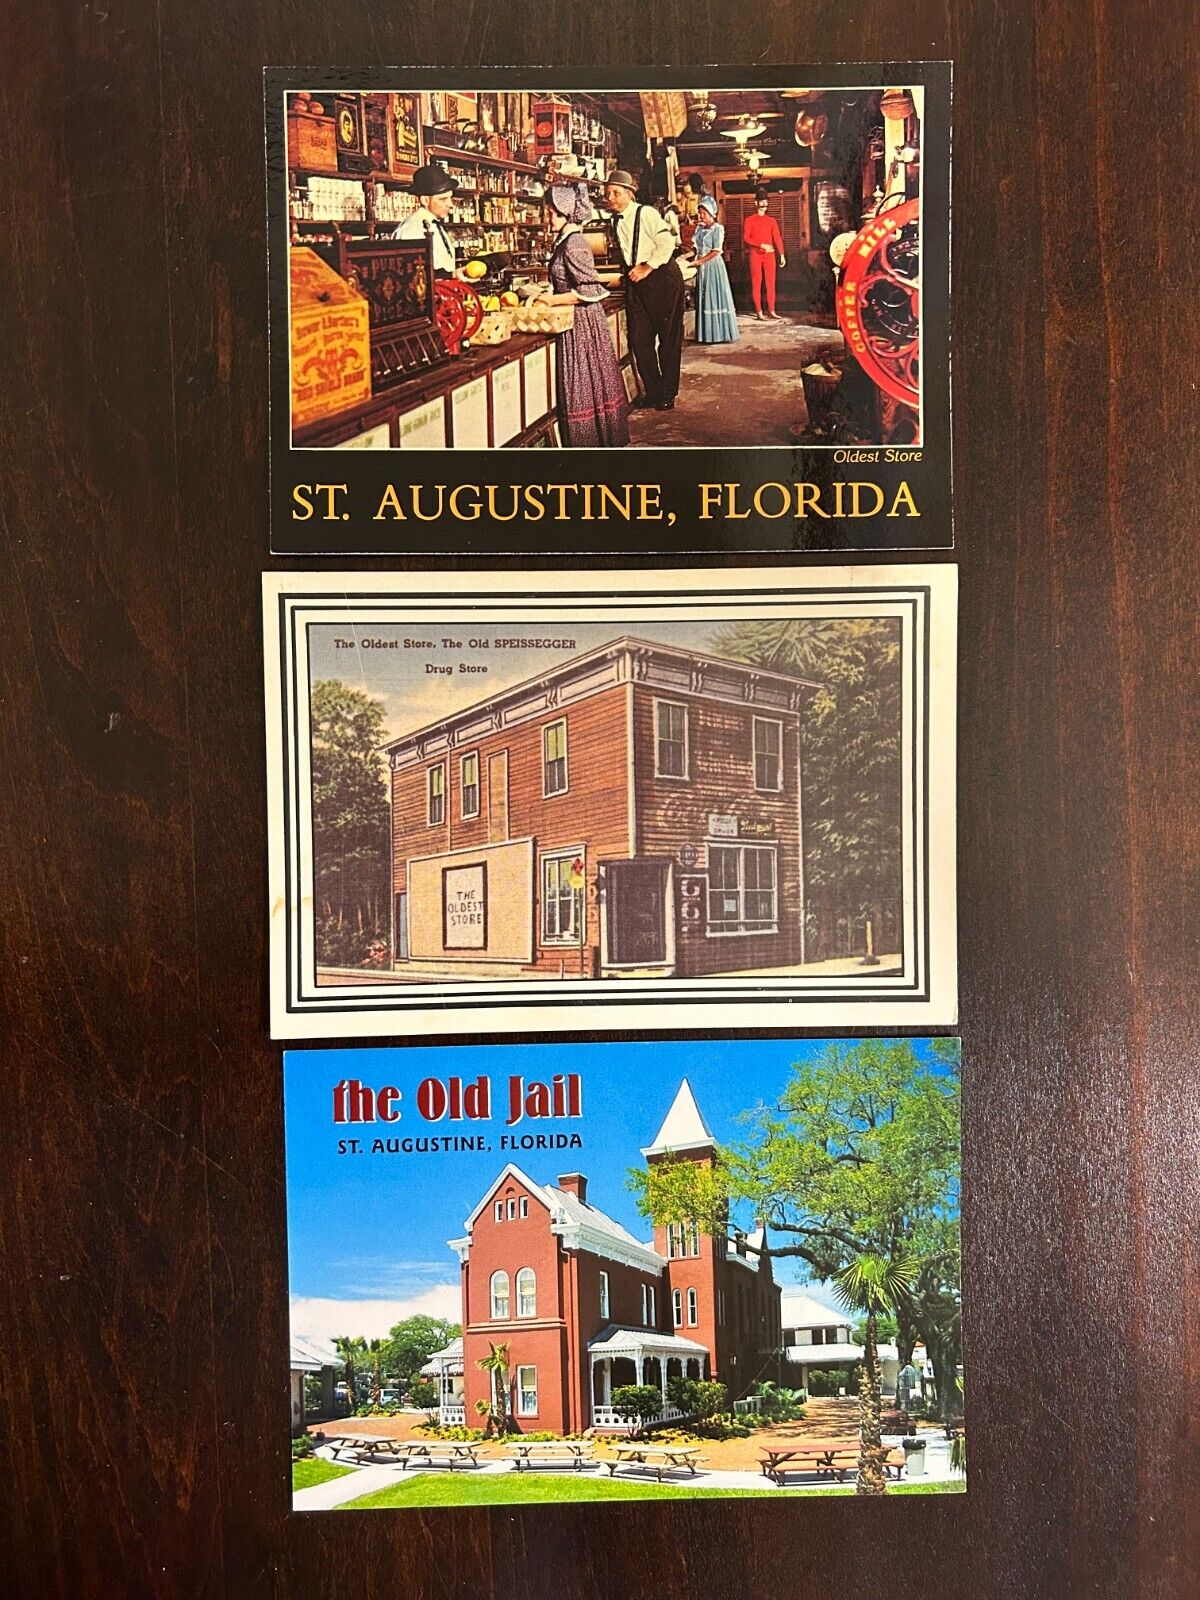 The Oldest Store & The Old Jail, St. Augustine, Florida Postcards (lot of 3)